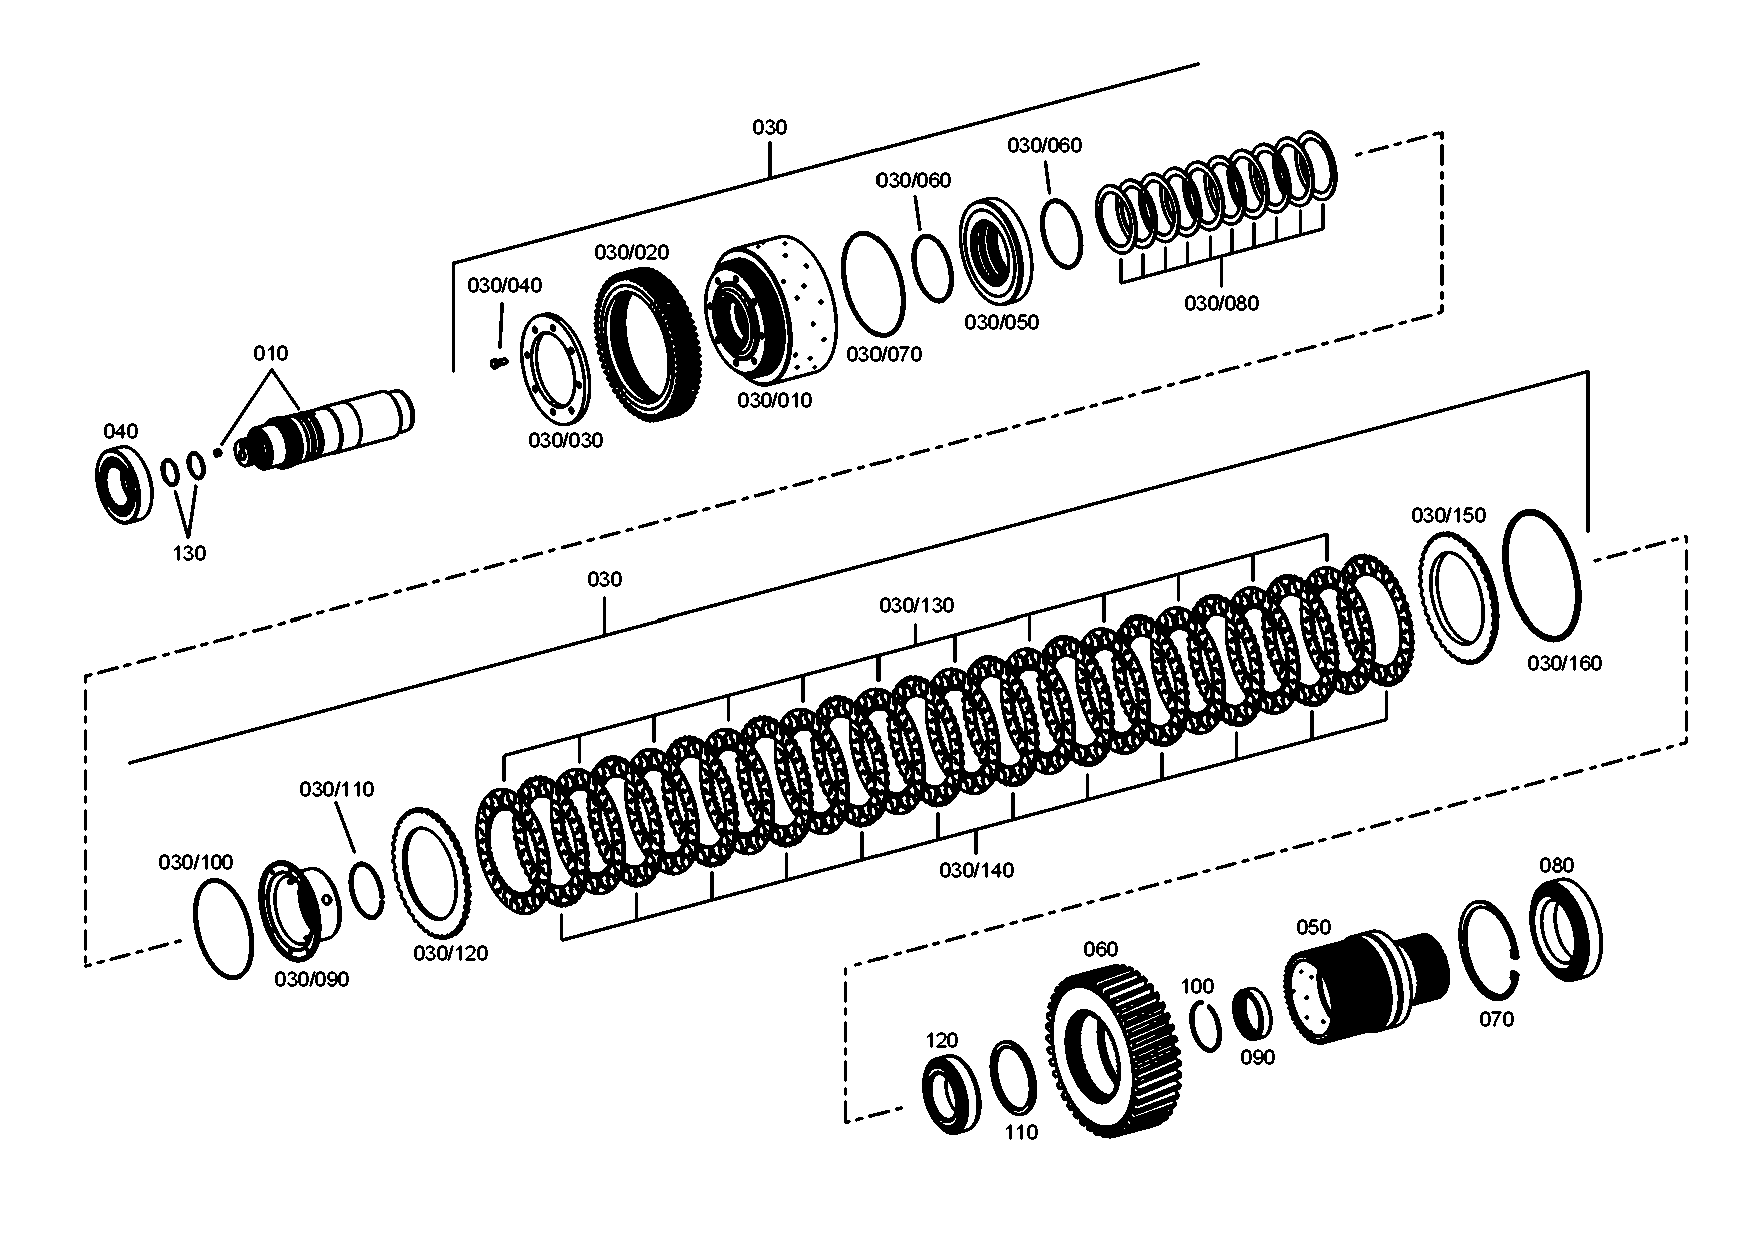 drawing for ASIA MOTORS CO. INC. 409-01-0130 - SNAP RING (figure 3)